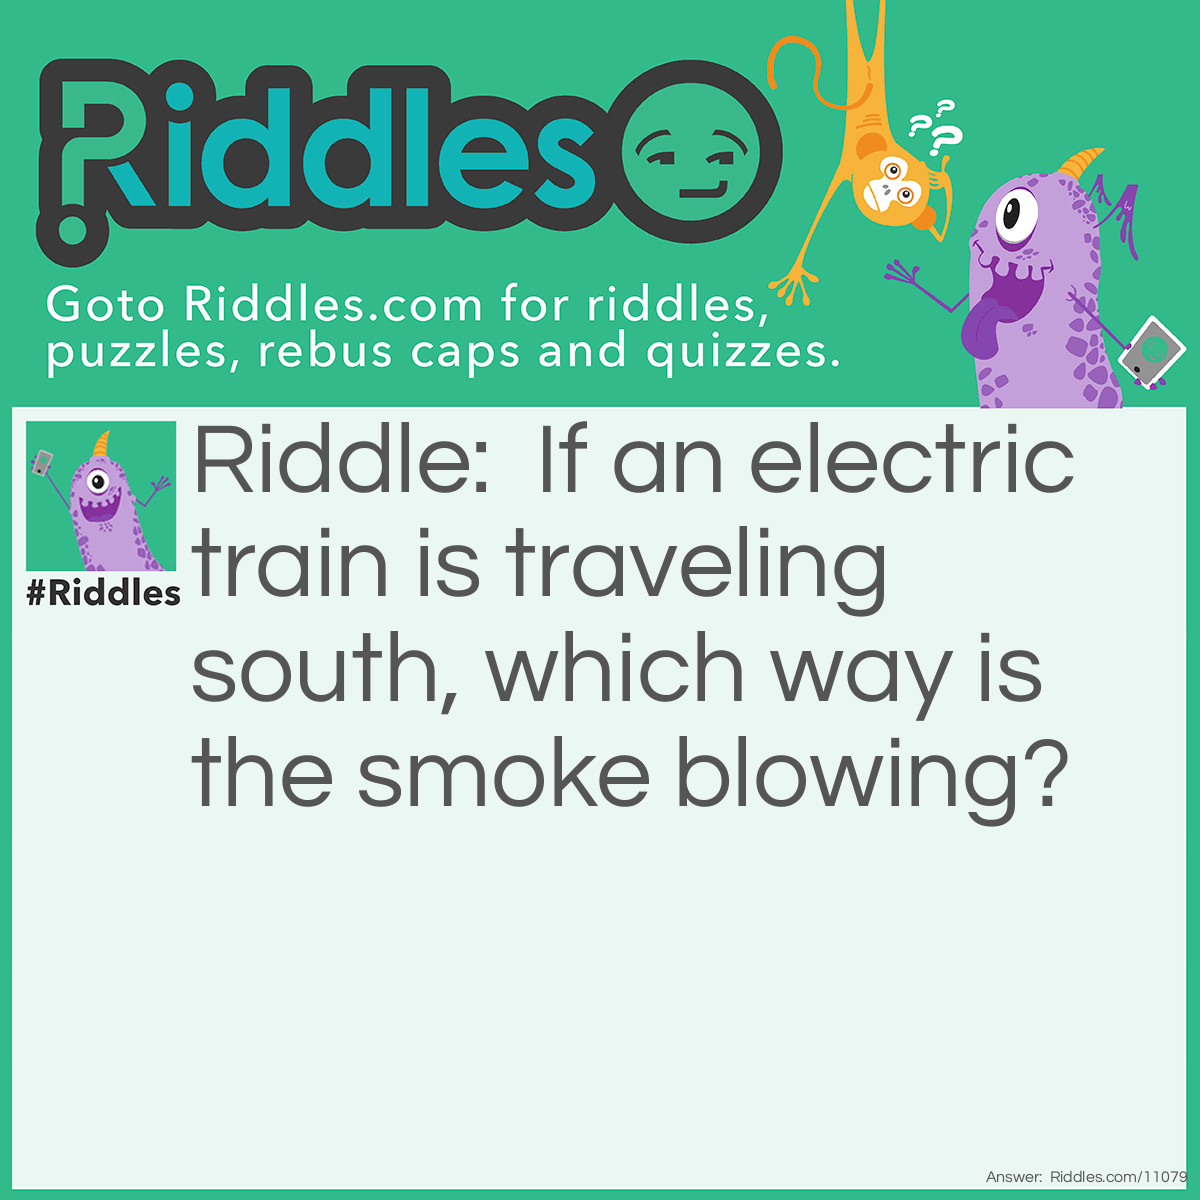 Riddle: If an electric train is traveling south, which way is the smoke blowing? Answer: There is no smoke because it's an electric train.